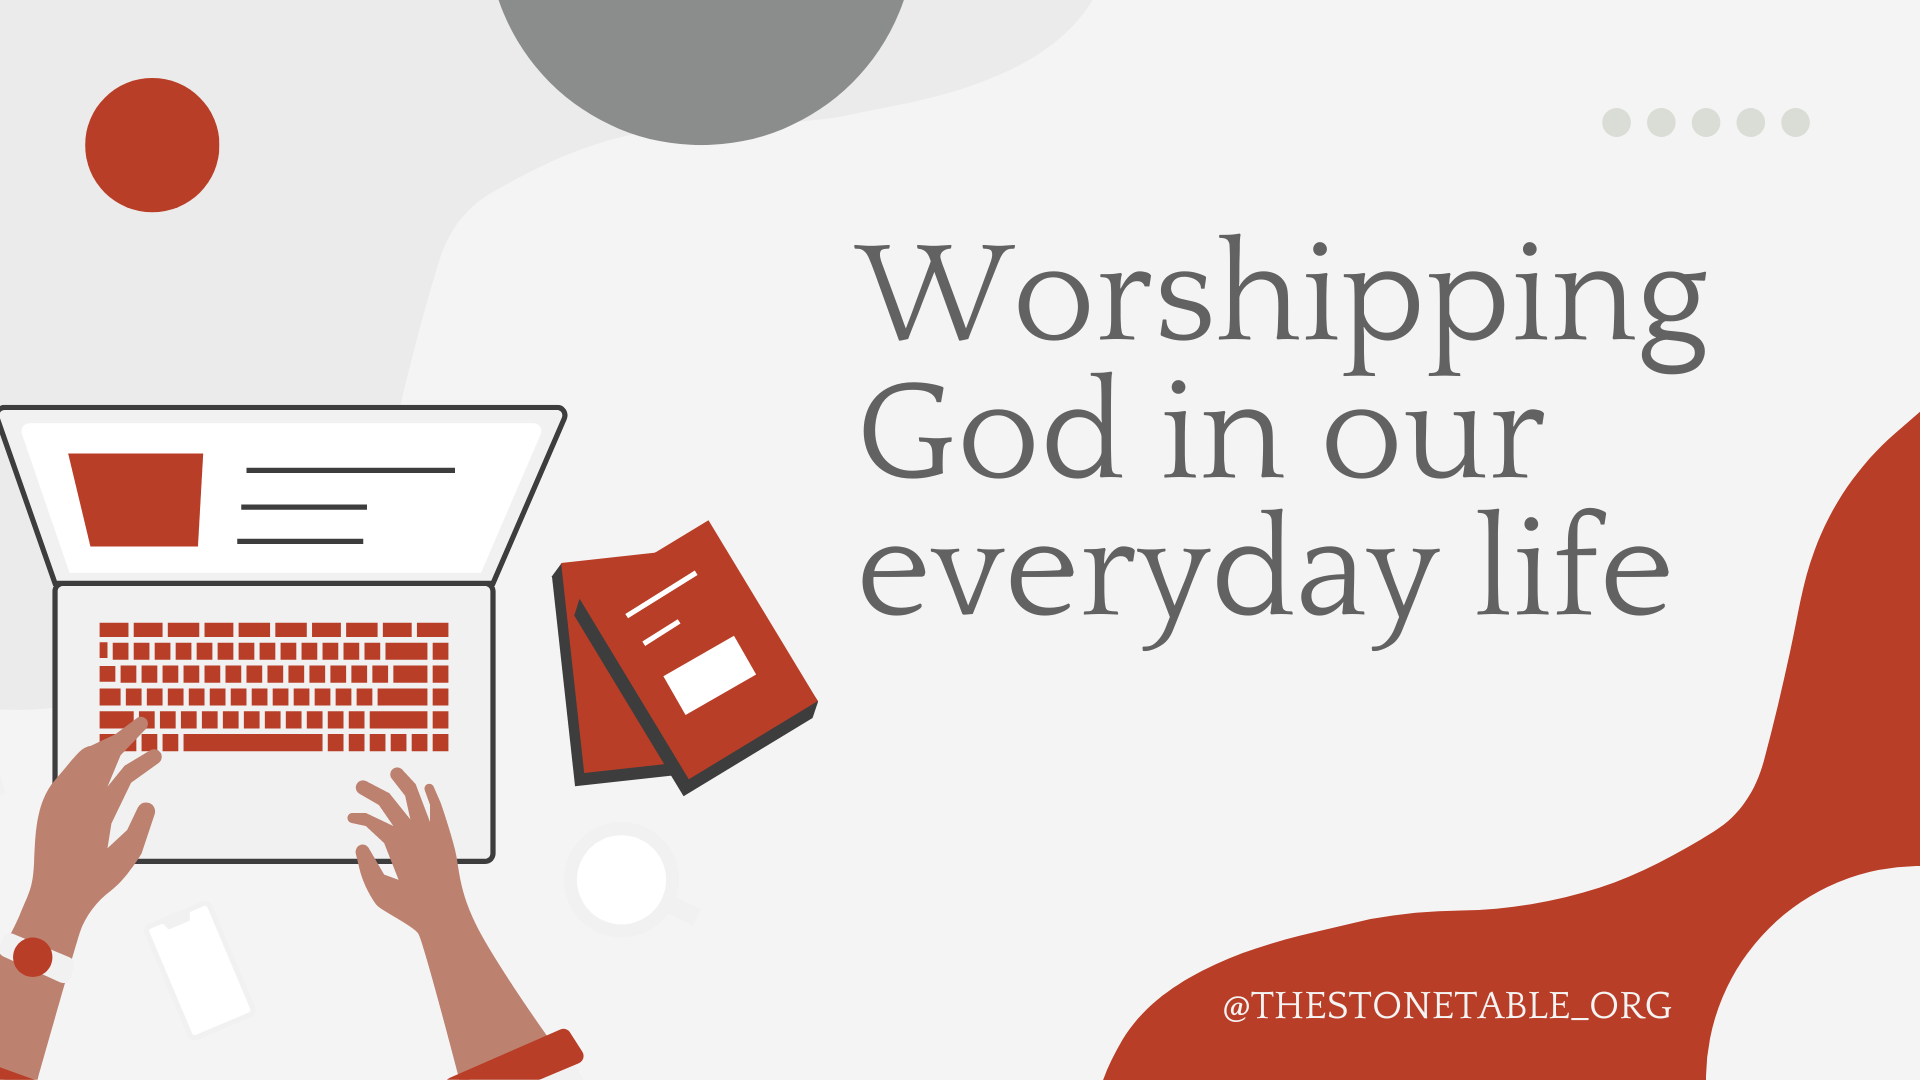 Worhipping, Worshipping god in our everyday life